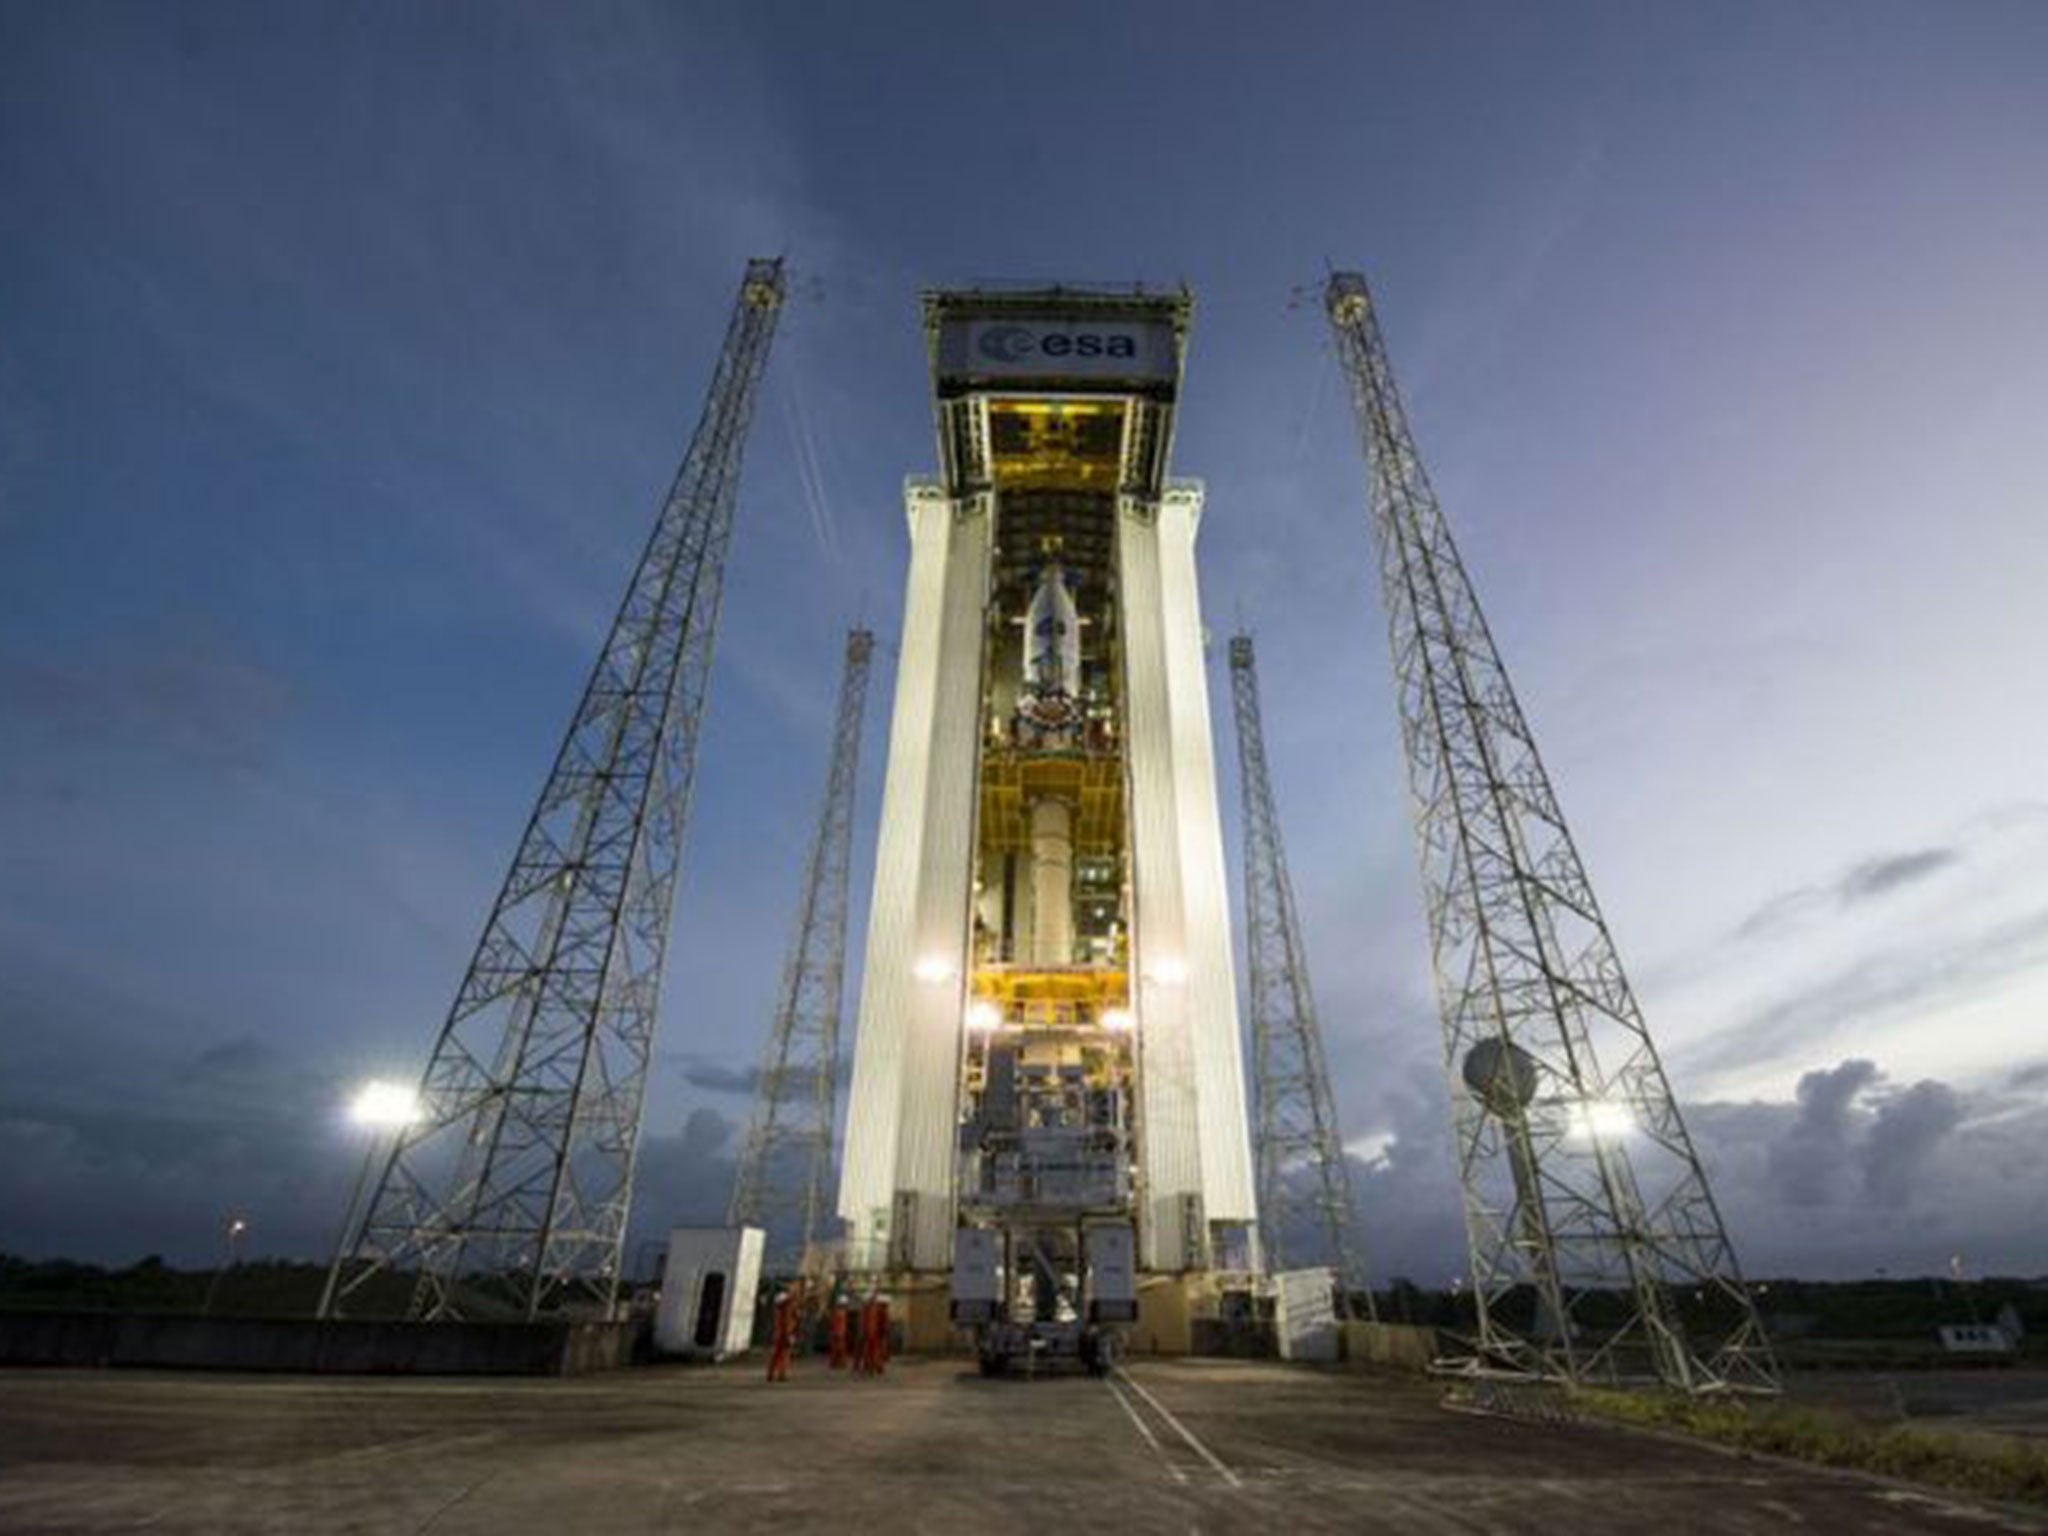 The ESA preparing for the launch on Wednesday